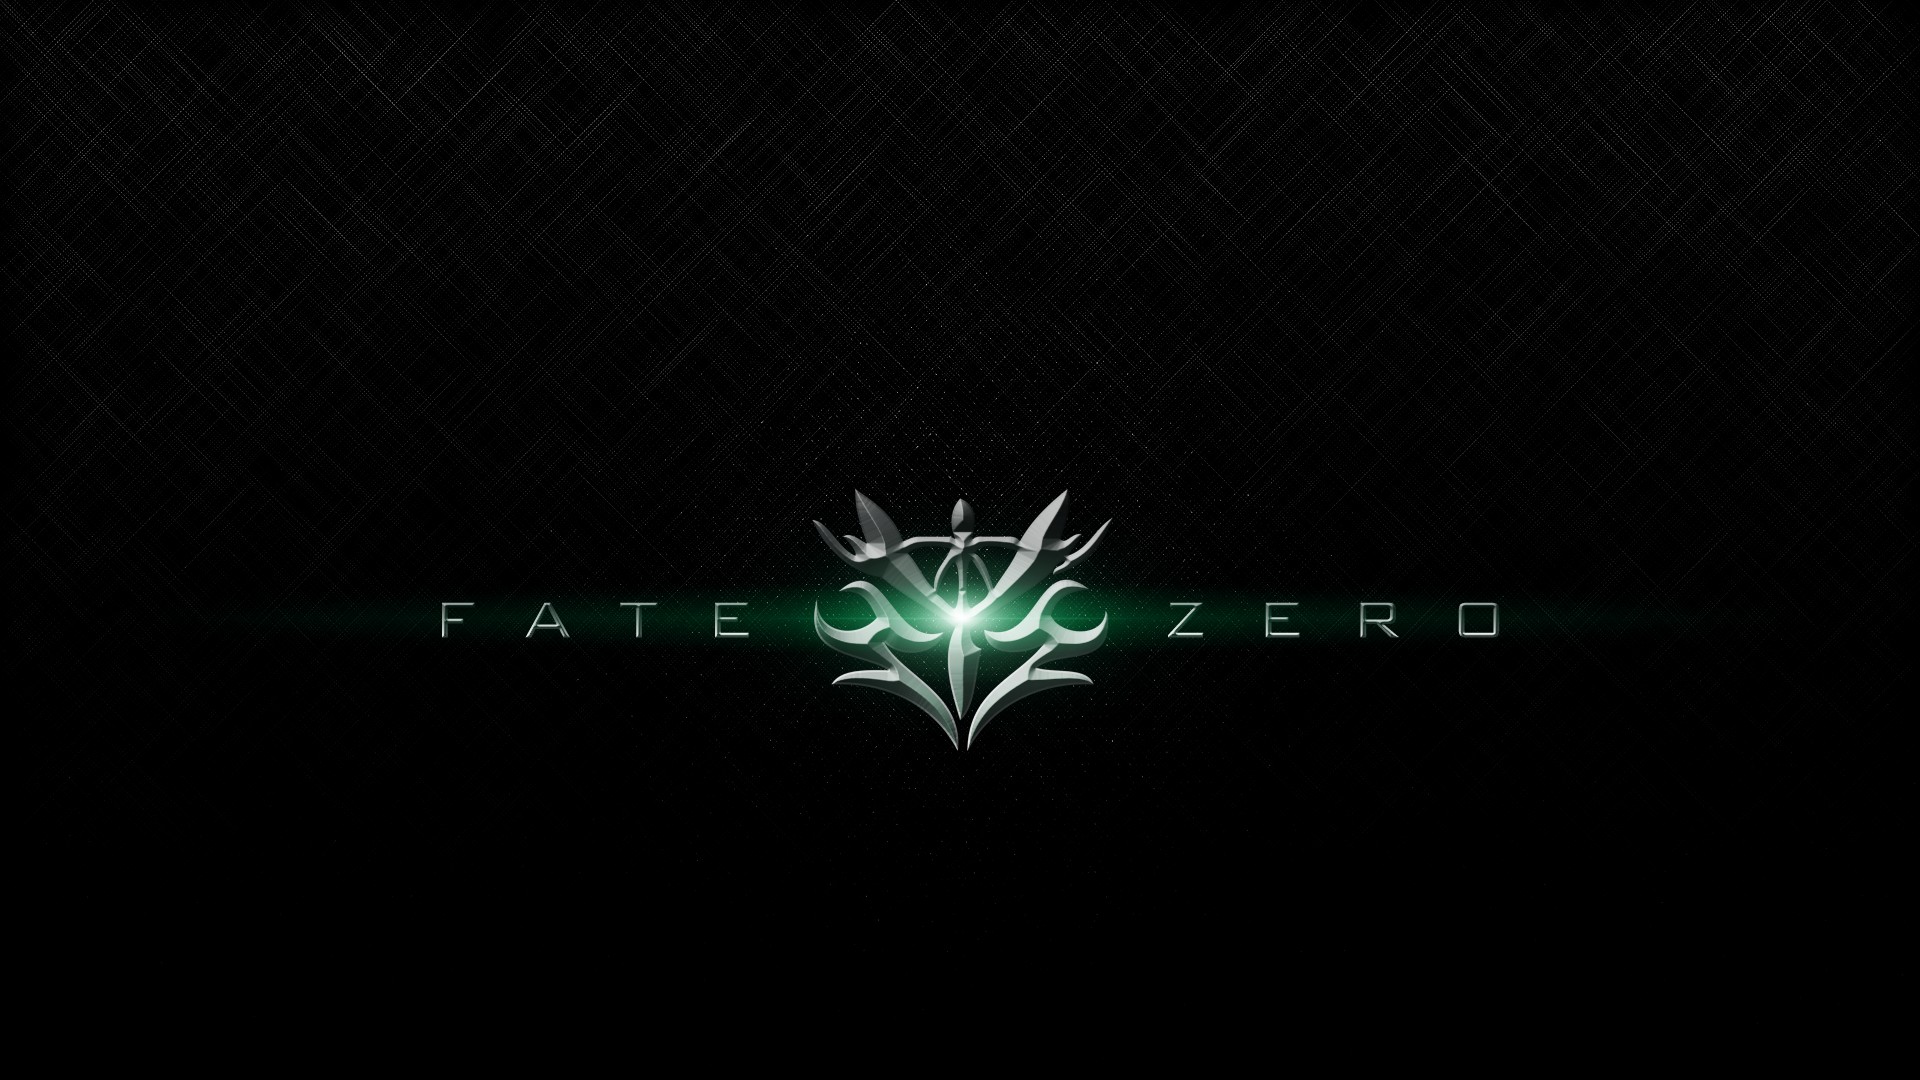  Fate/zero HQ Background Wallpapers